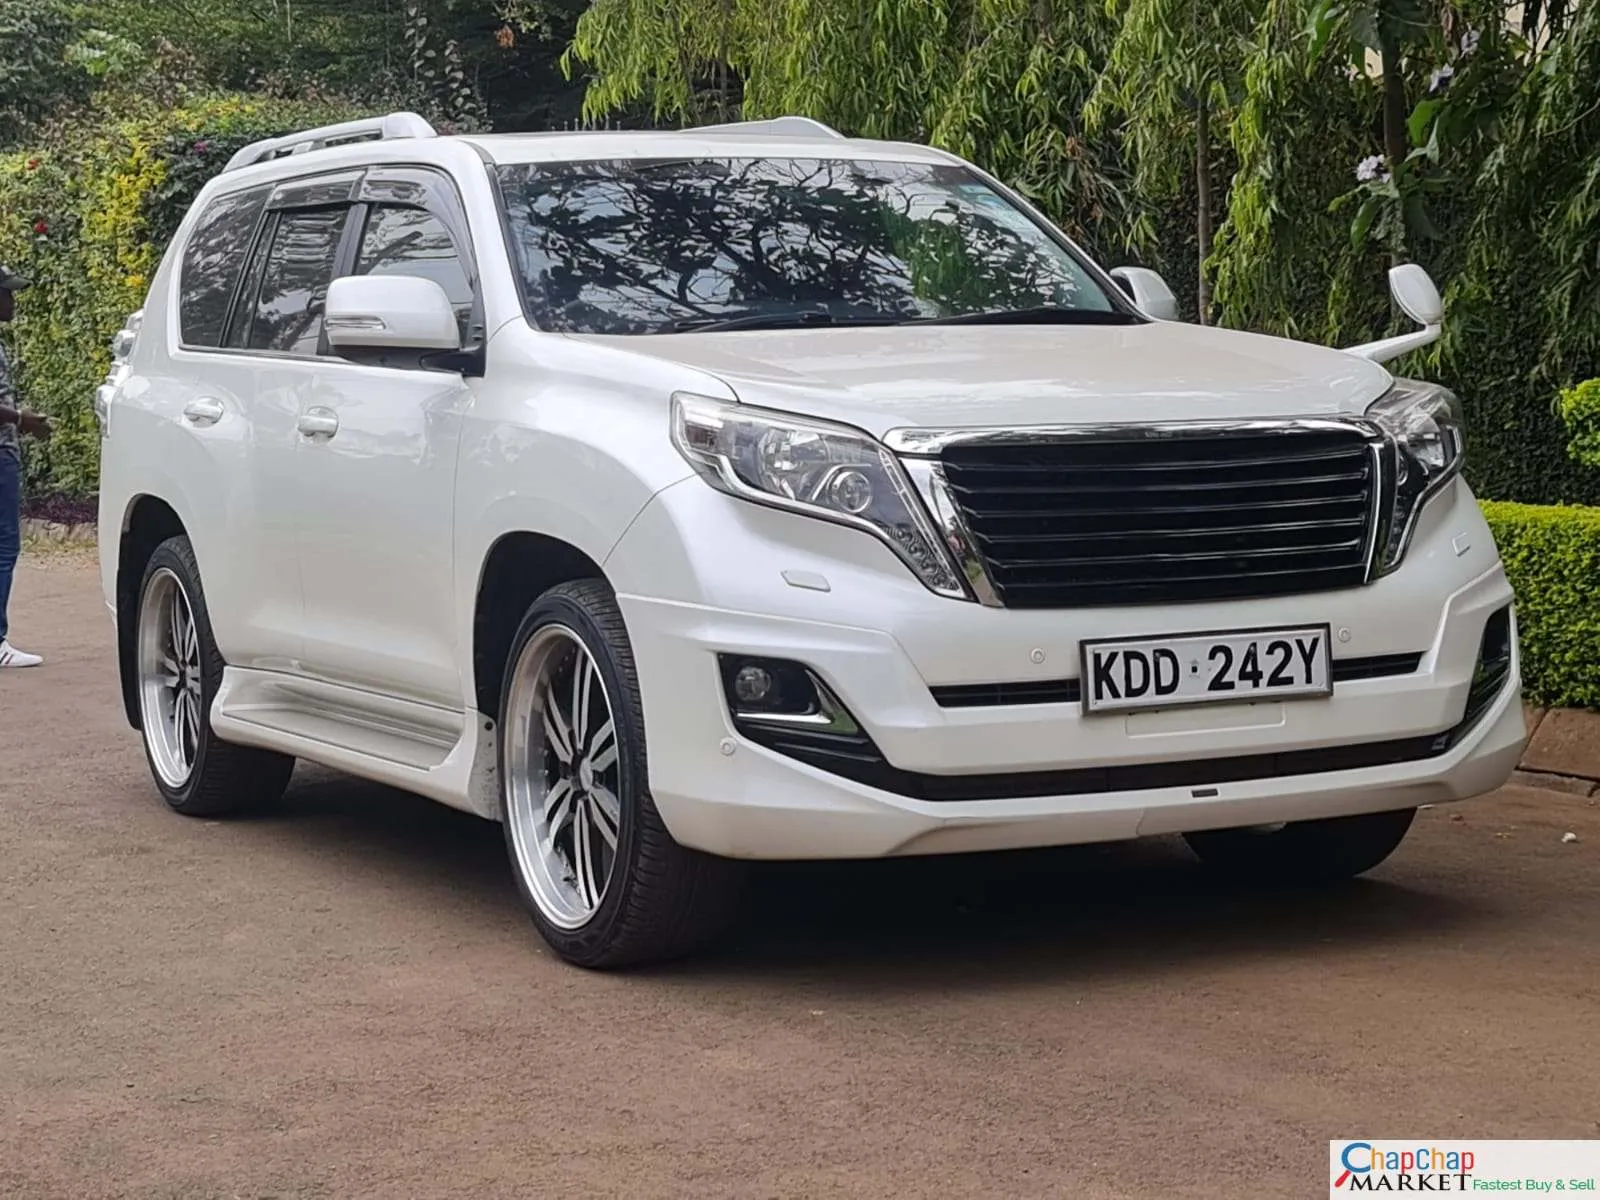 Toyota Prado j150 for sale in Kenya with SUNROOF 🔥 You Pay 30% Deposit Trade in OK EXCLUSIVE